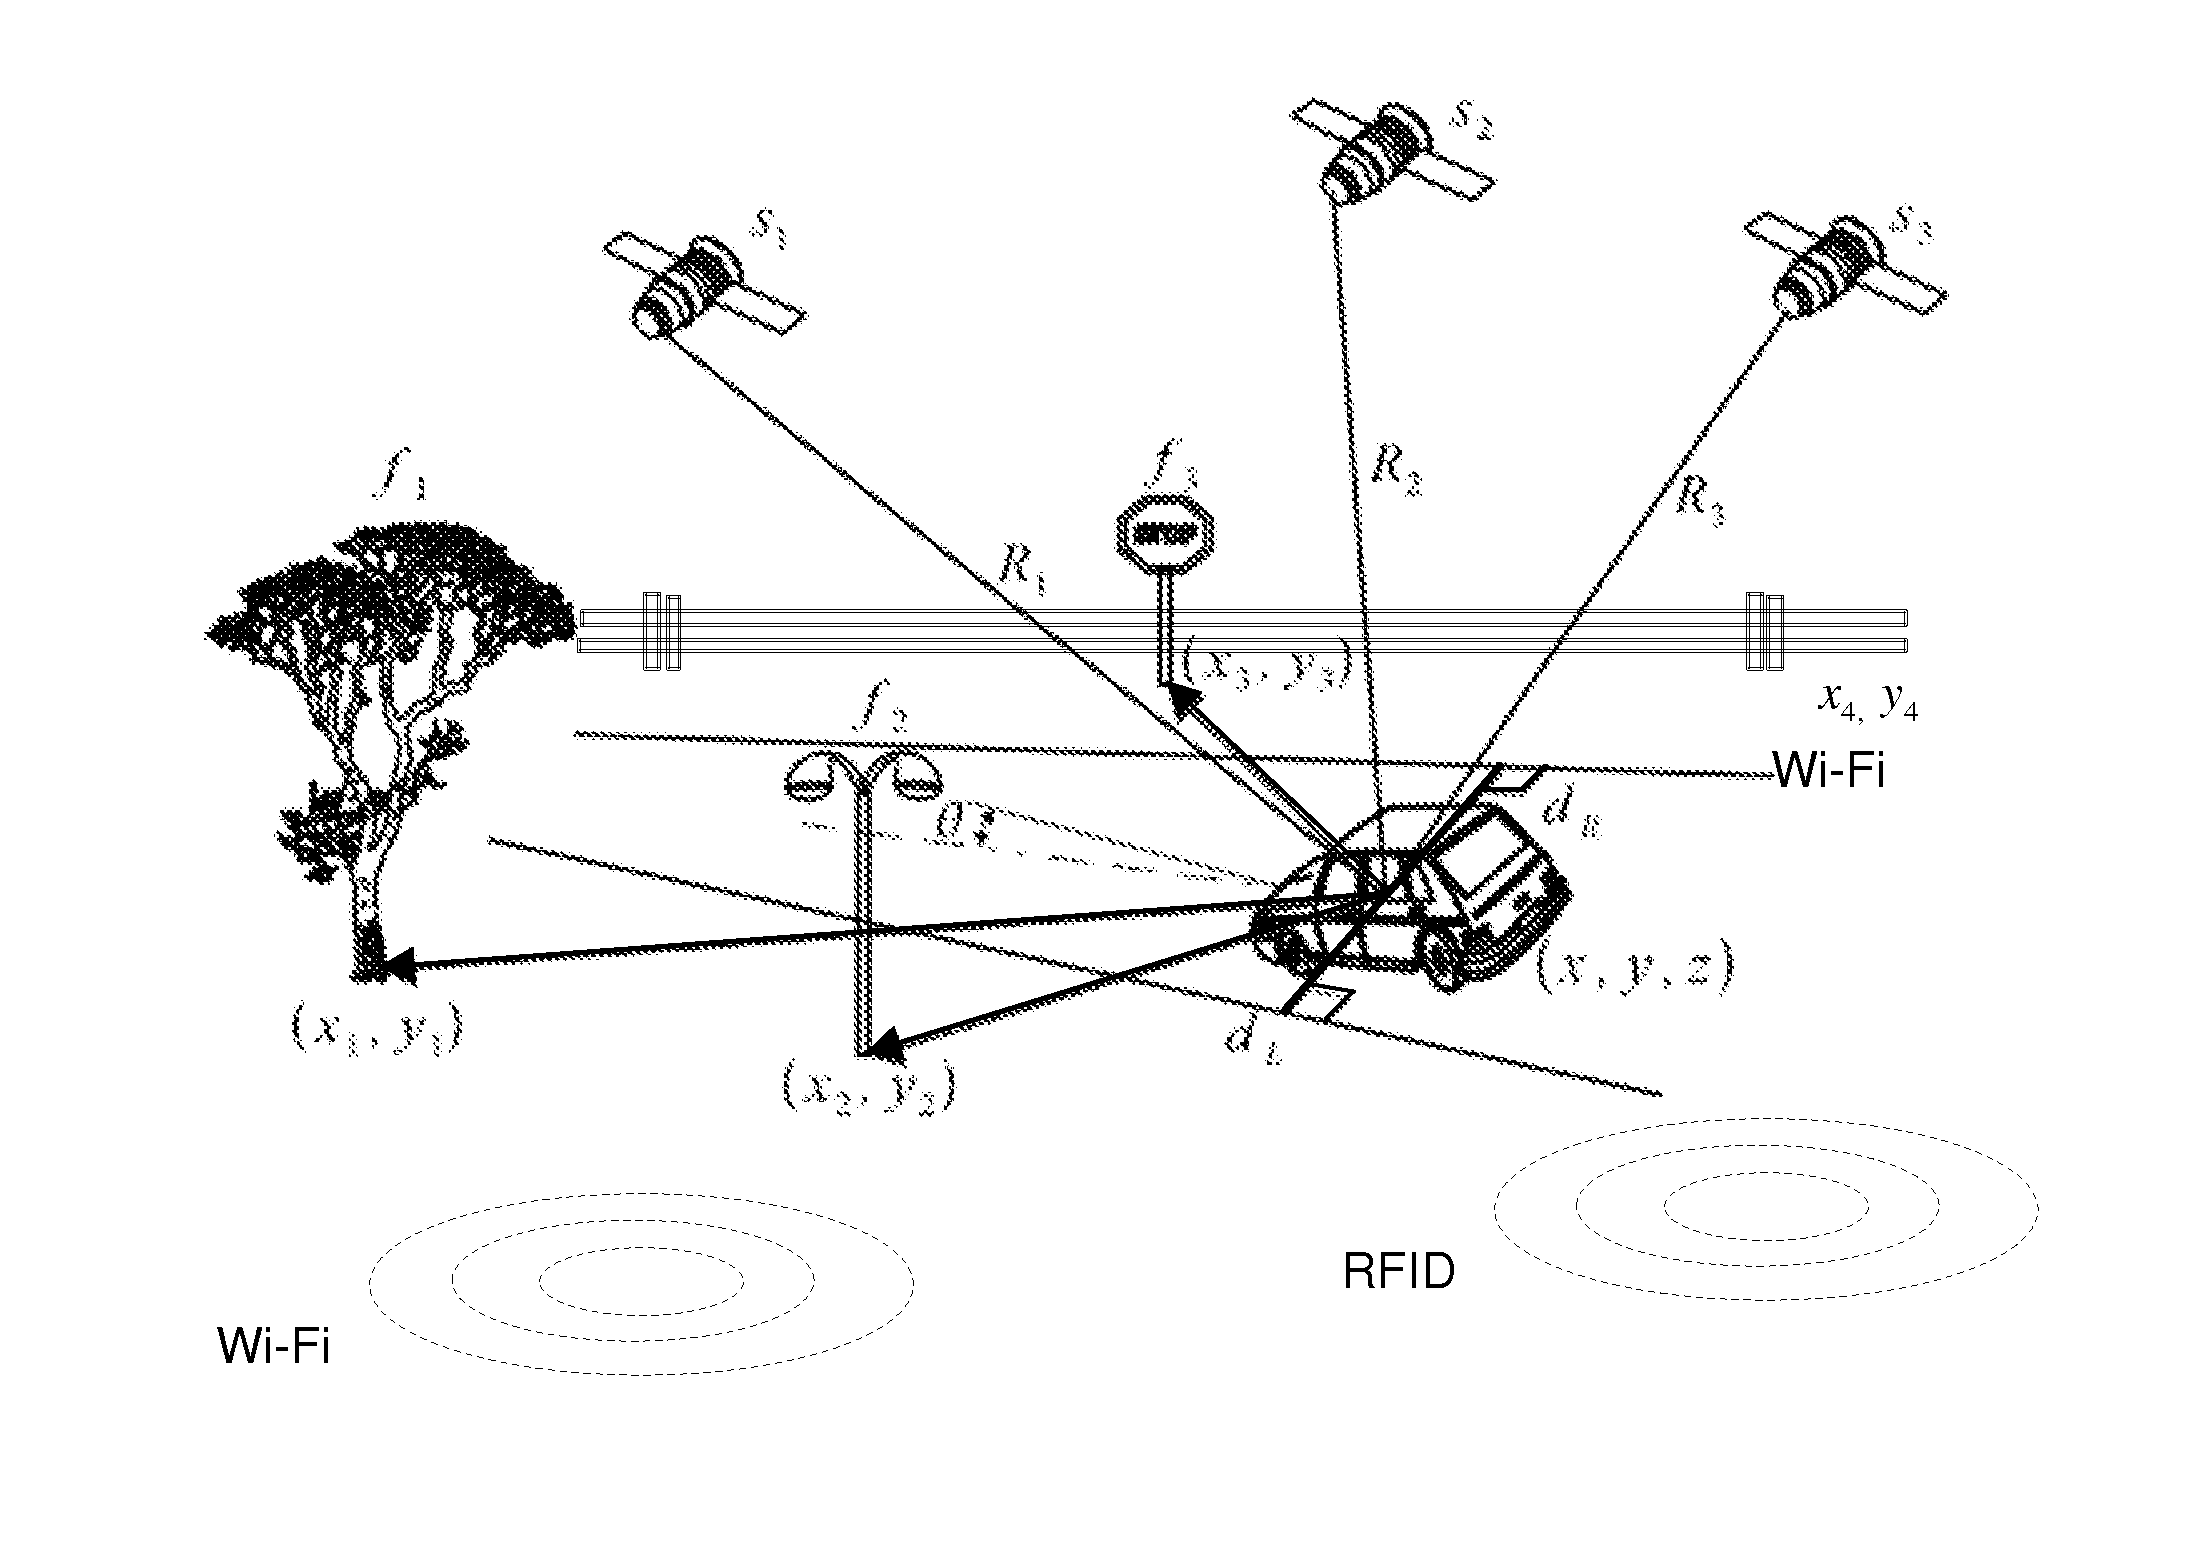 Sensor-aided vehicle positioning system